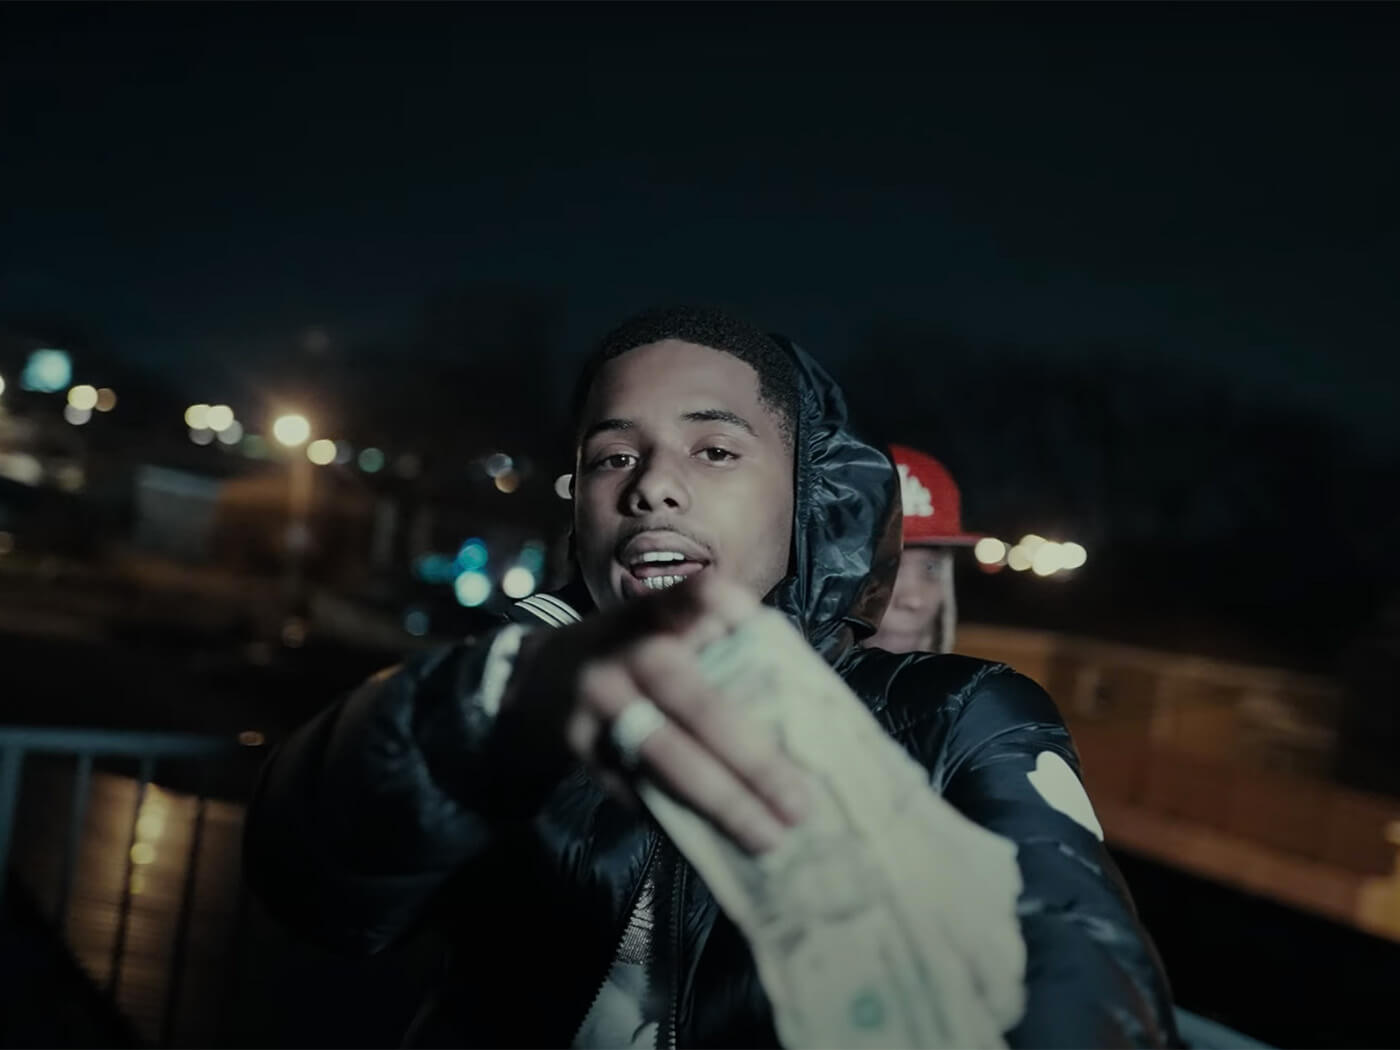 Pooh Shiesty enlists Lil Durk for “Back in Blood” MV